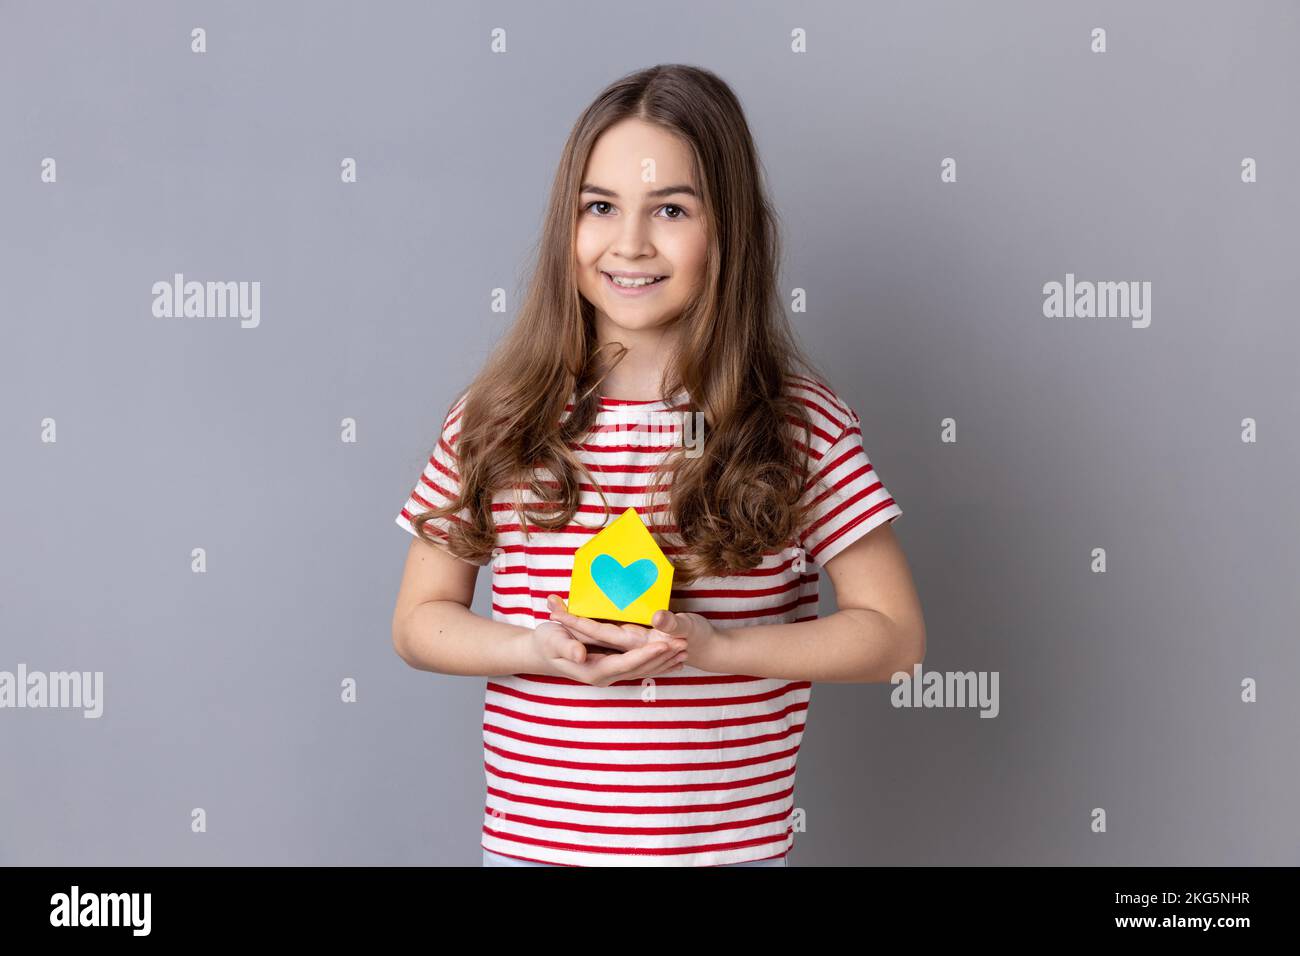 Portrait of little girl wearing striped T-shirt holding in hands little paper house looking at camera with smile, dreaming about apartment. Indoor studio shot isolated on gray background. Stock Photo